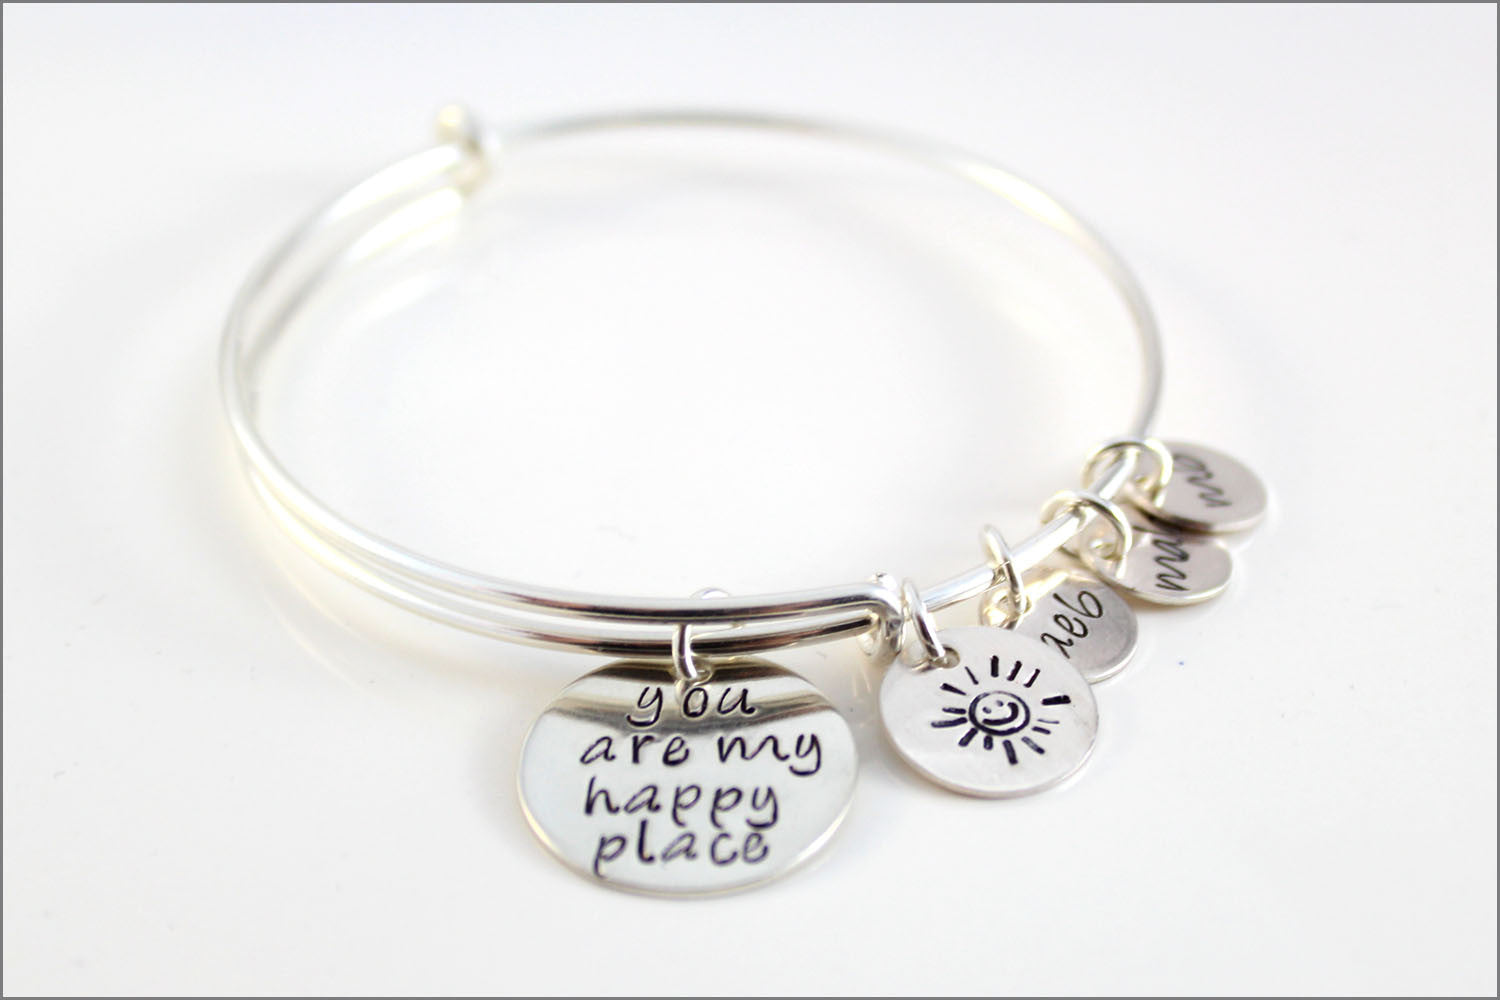 Personalized Bangle Bracelet | Sterling Silver Charm Bracelet, You are My Happy Place, Initial Charm Bracelet, Gifts for Mom